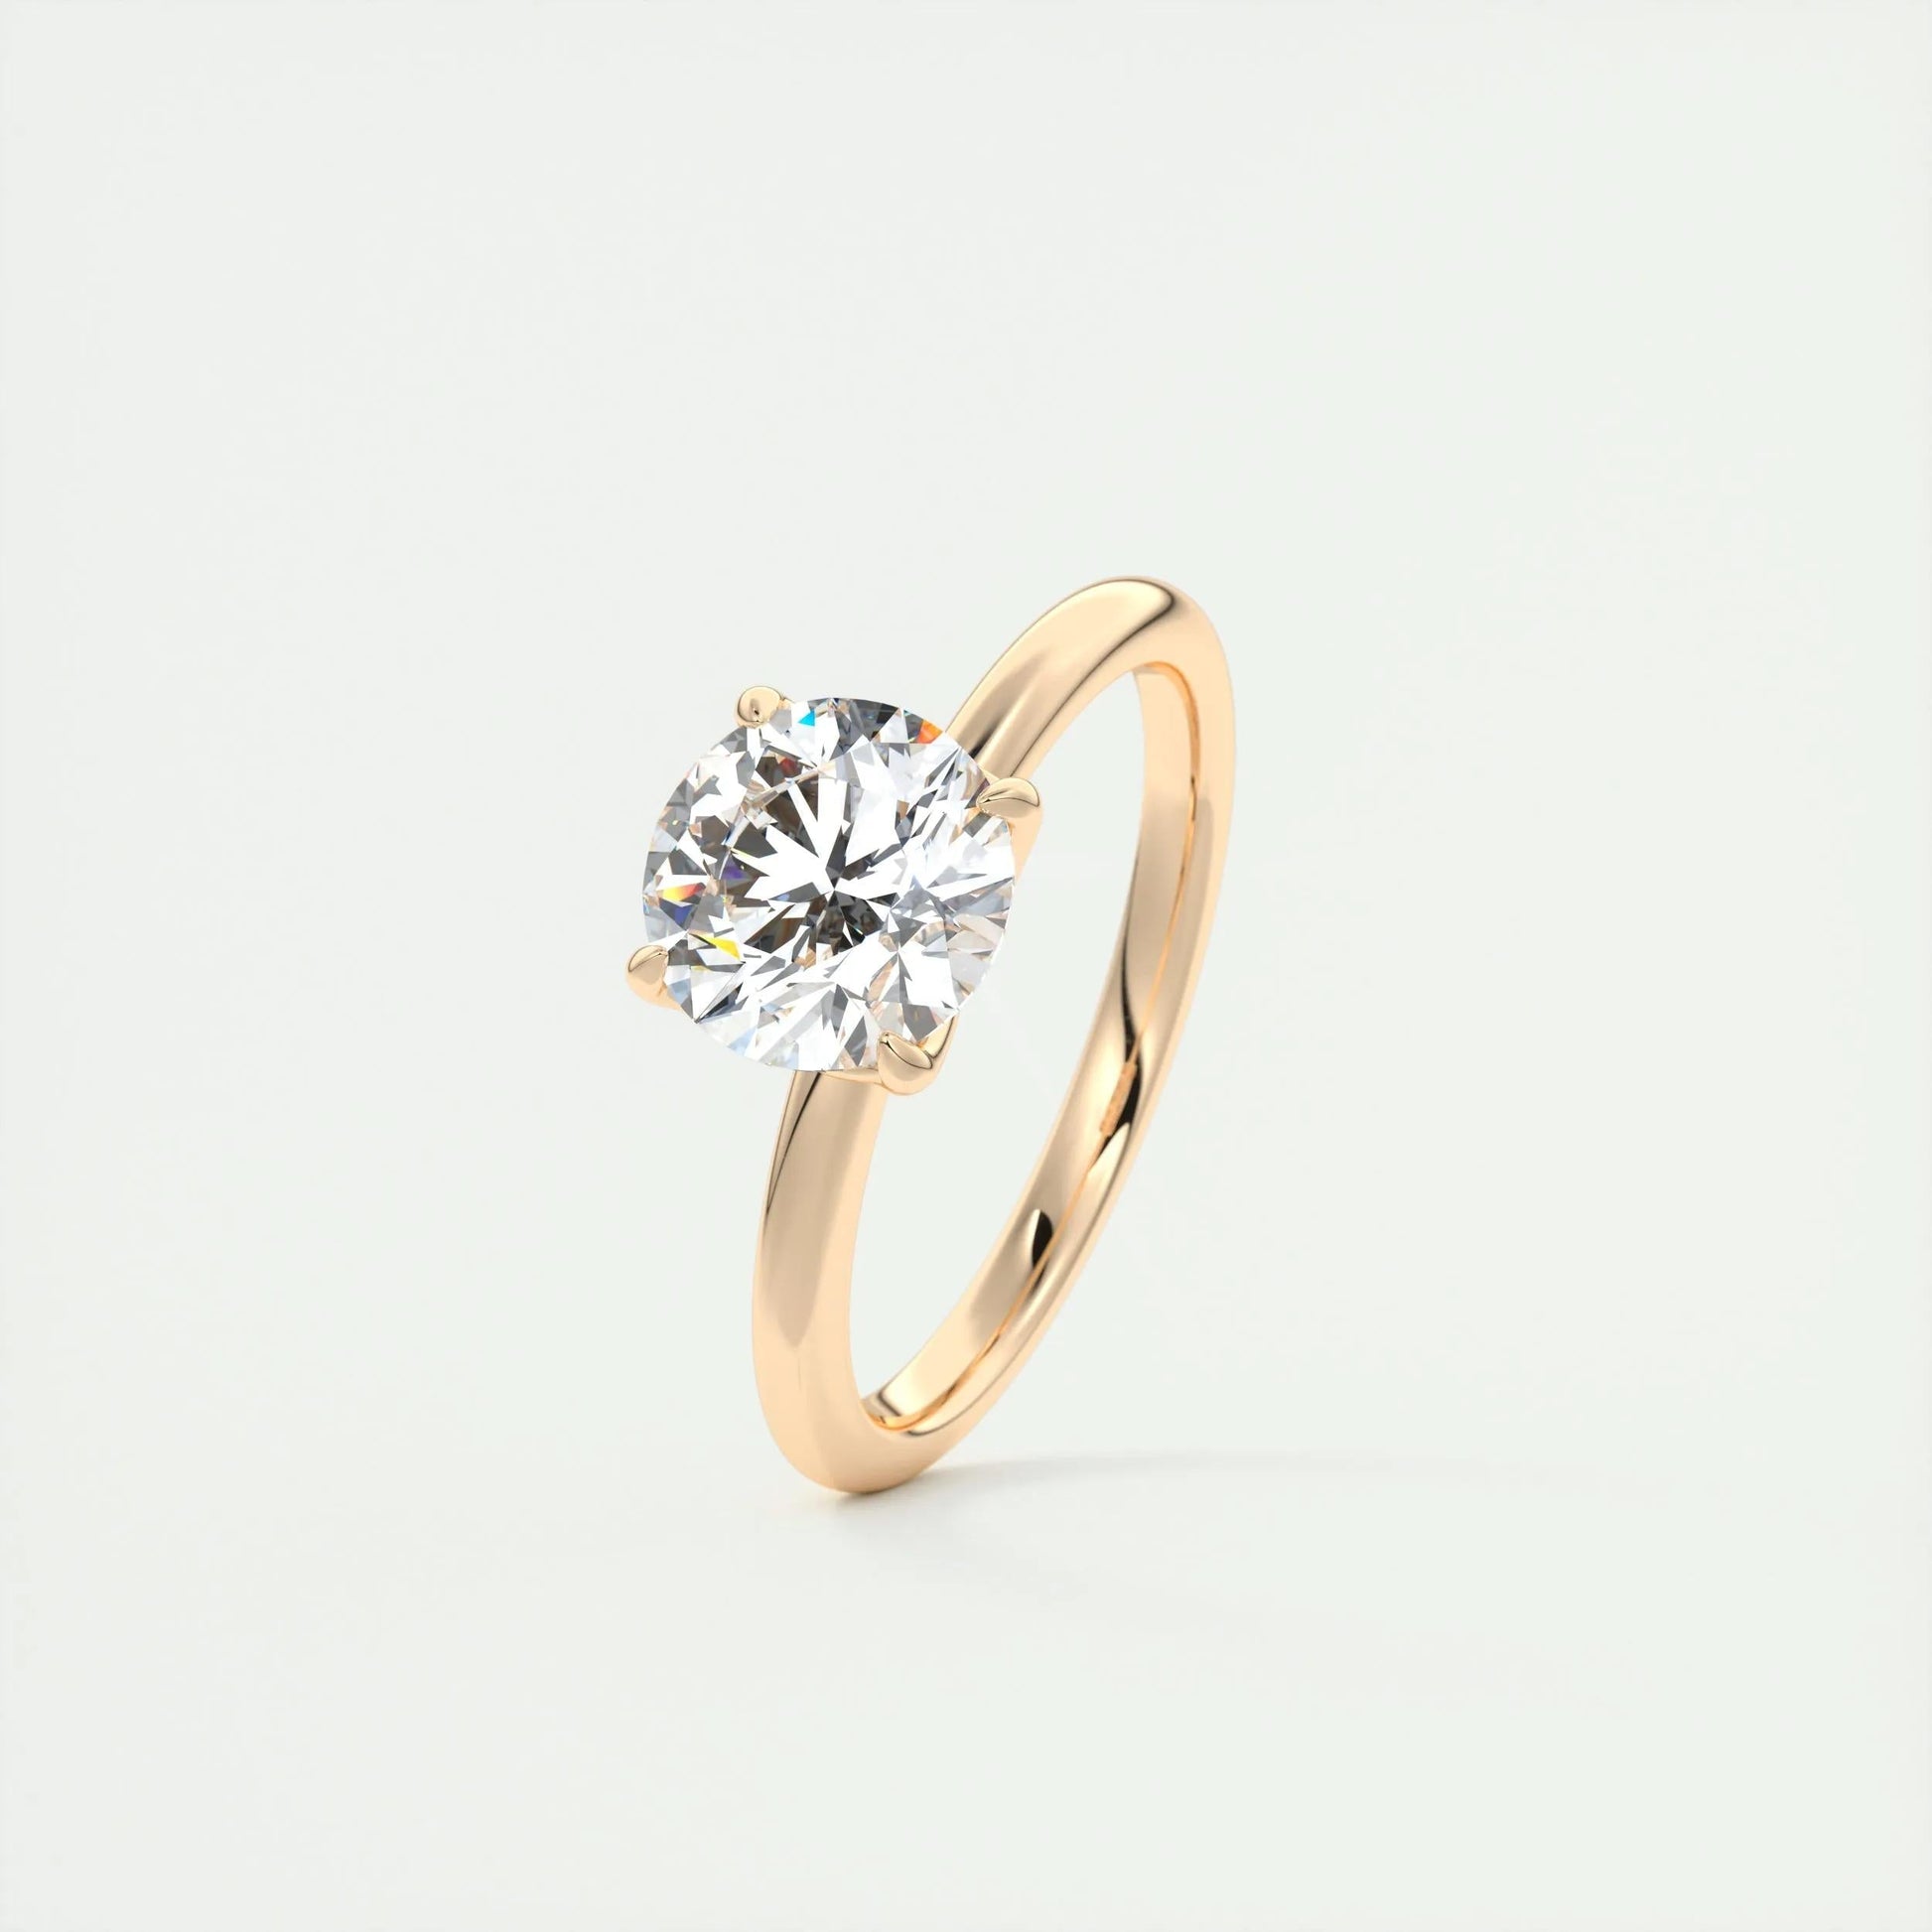 1.5 CT Round Solitaire CVD F/VS1 Diamond Engagement Ring 18